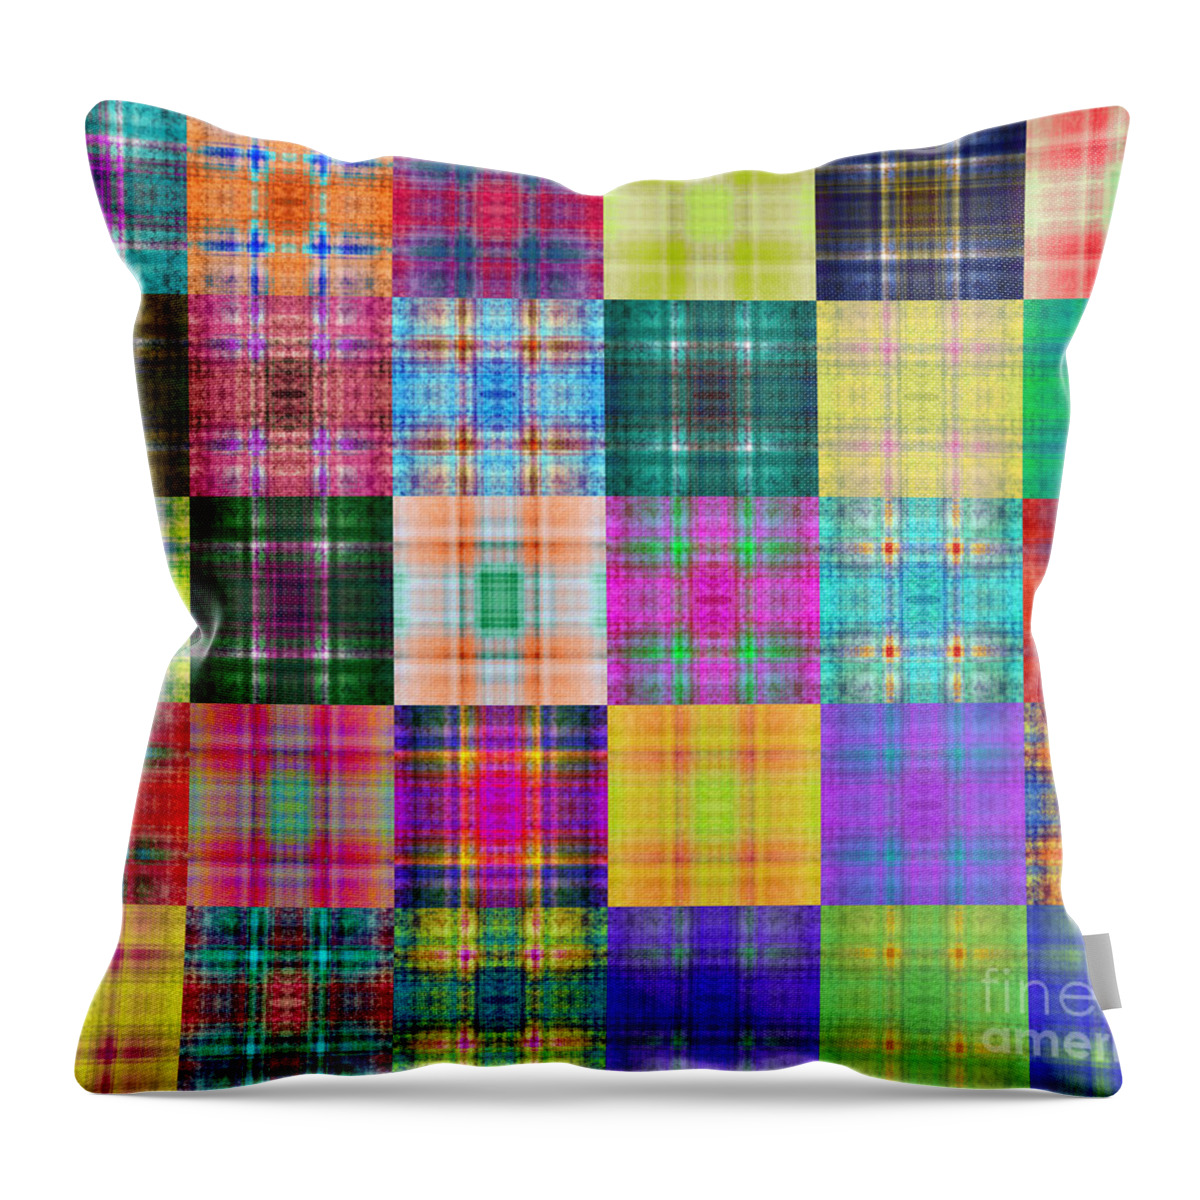 Andee Design Abstract Throw Pillow featuring the digital art Colorful Plaid Diptych Panel 2 by Andee Design